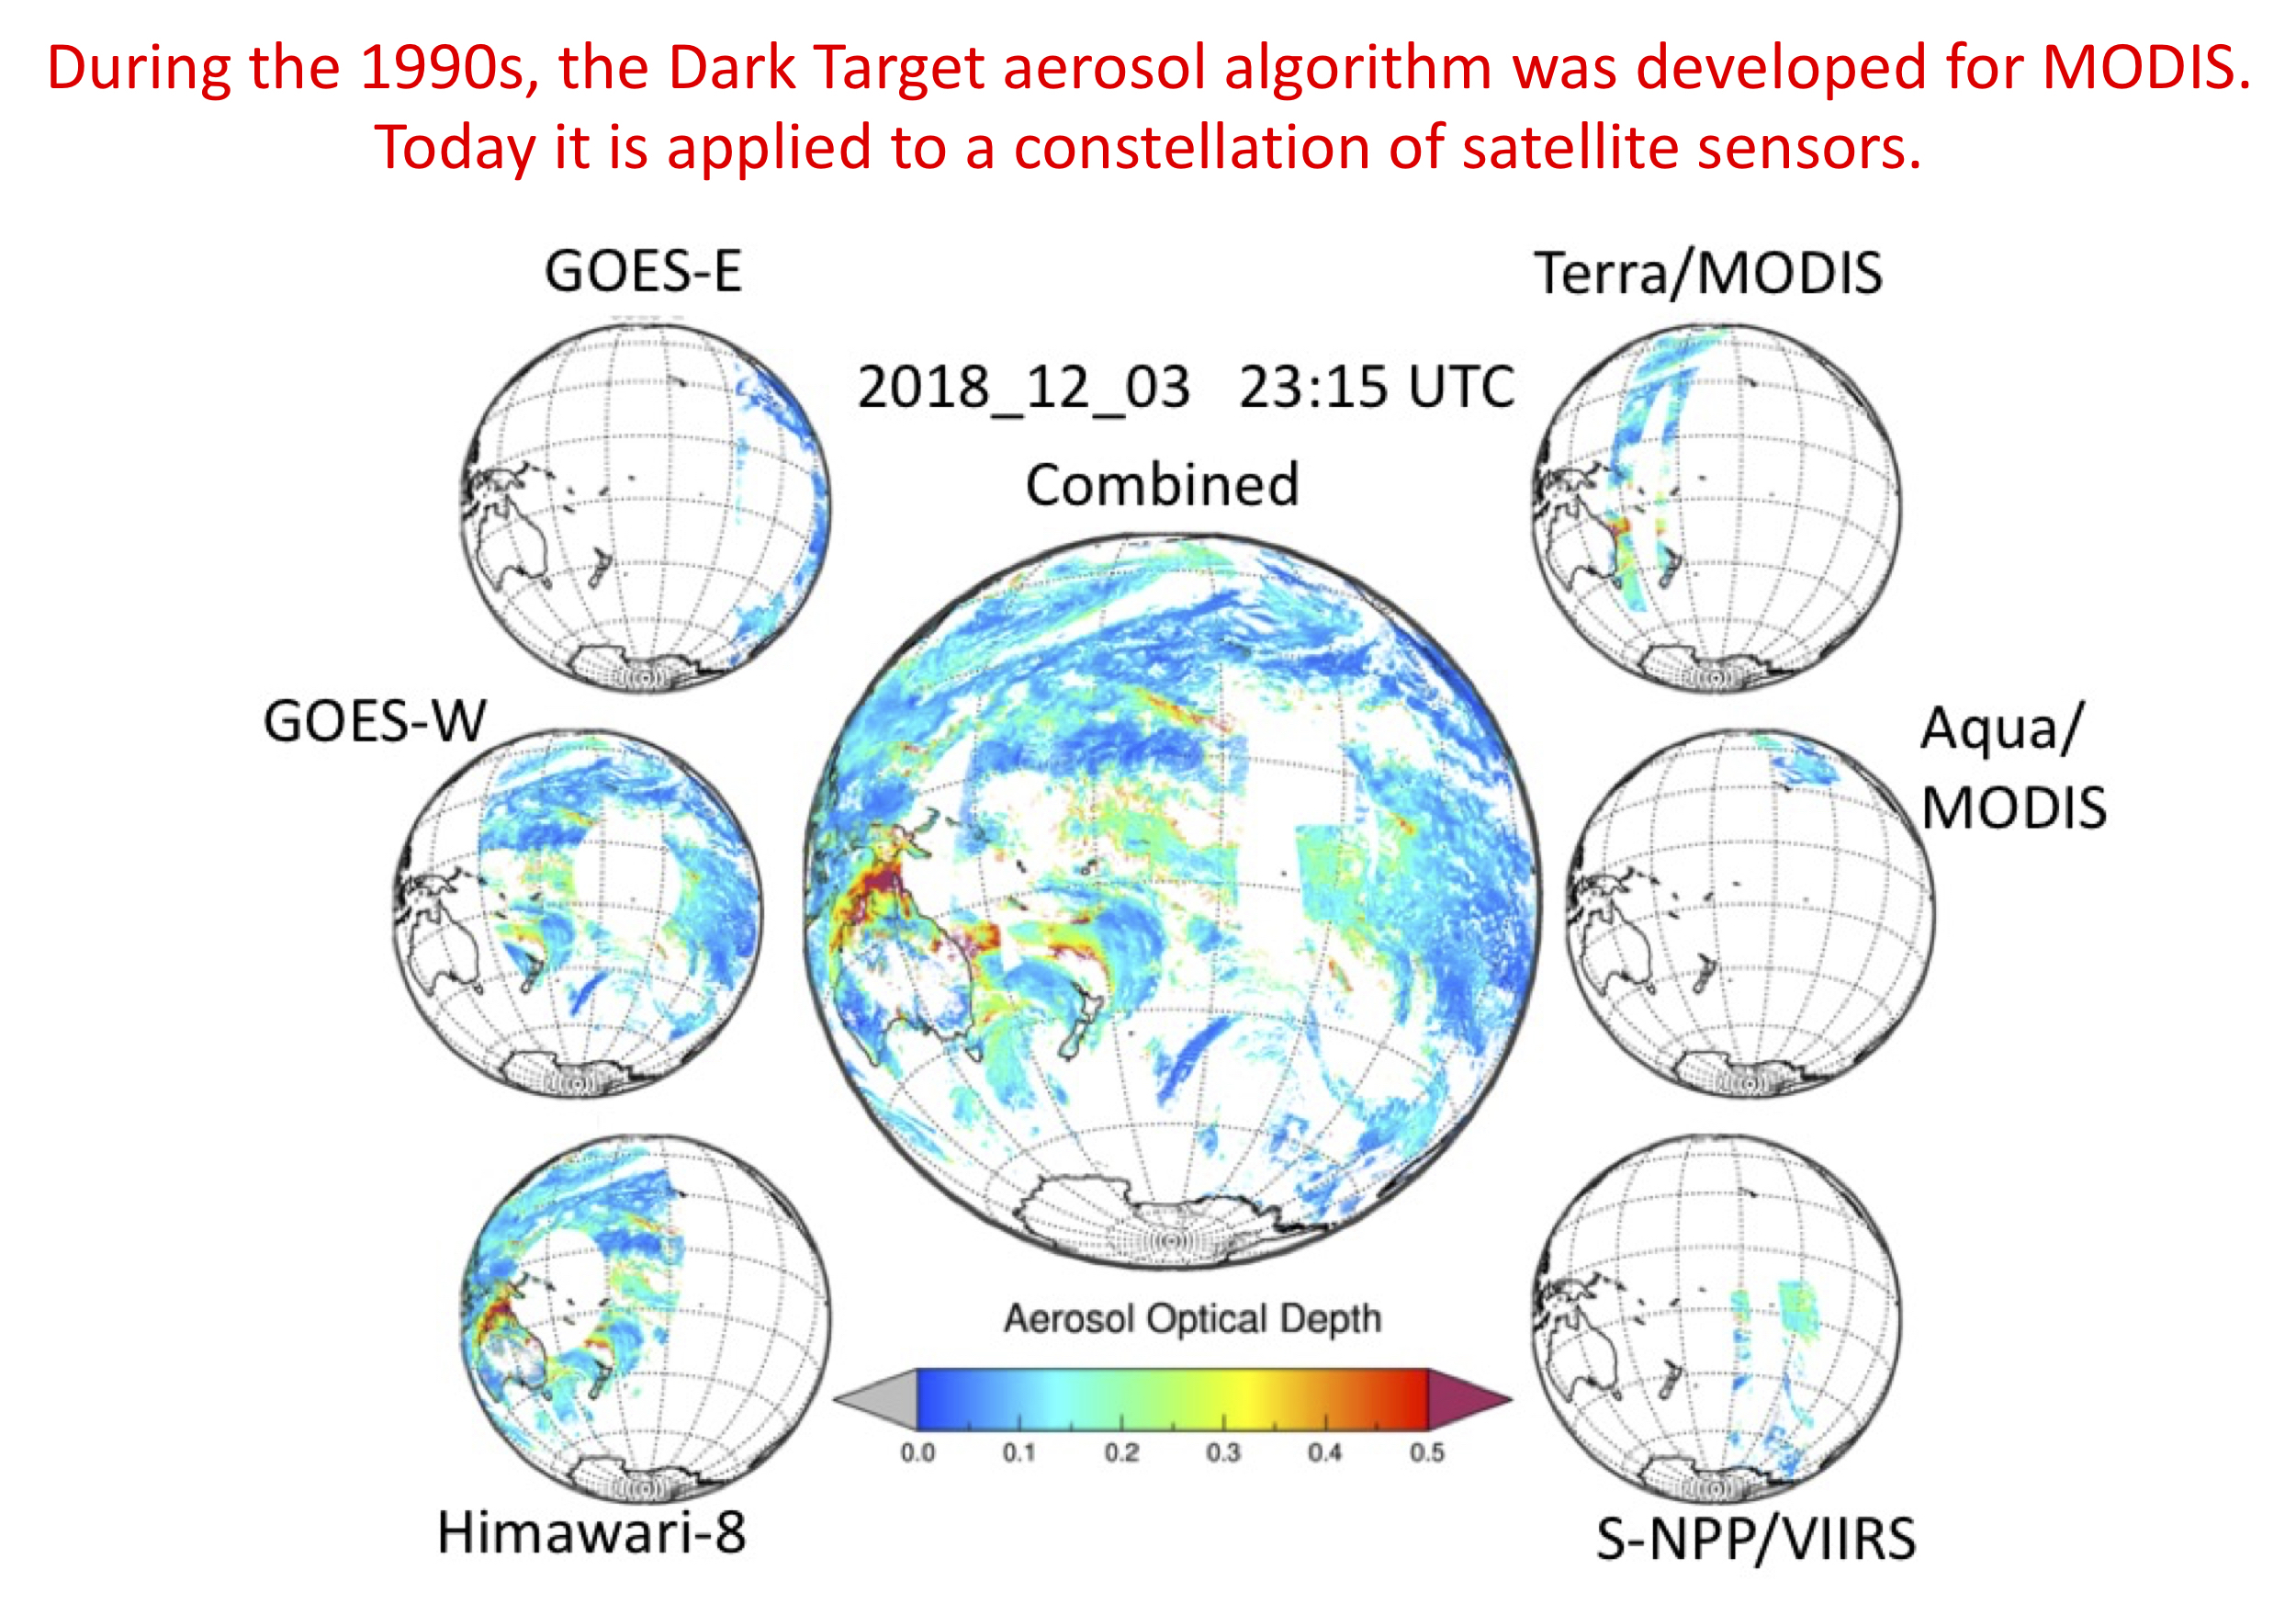 Remote Sensing | Free Full-Text | The Dark Target Algorithm for Observing  the Global Aerosol System: Past, Present, and Future | HTML